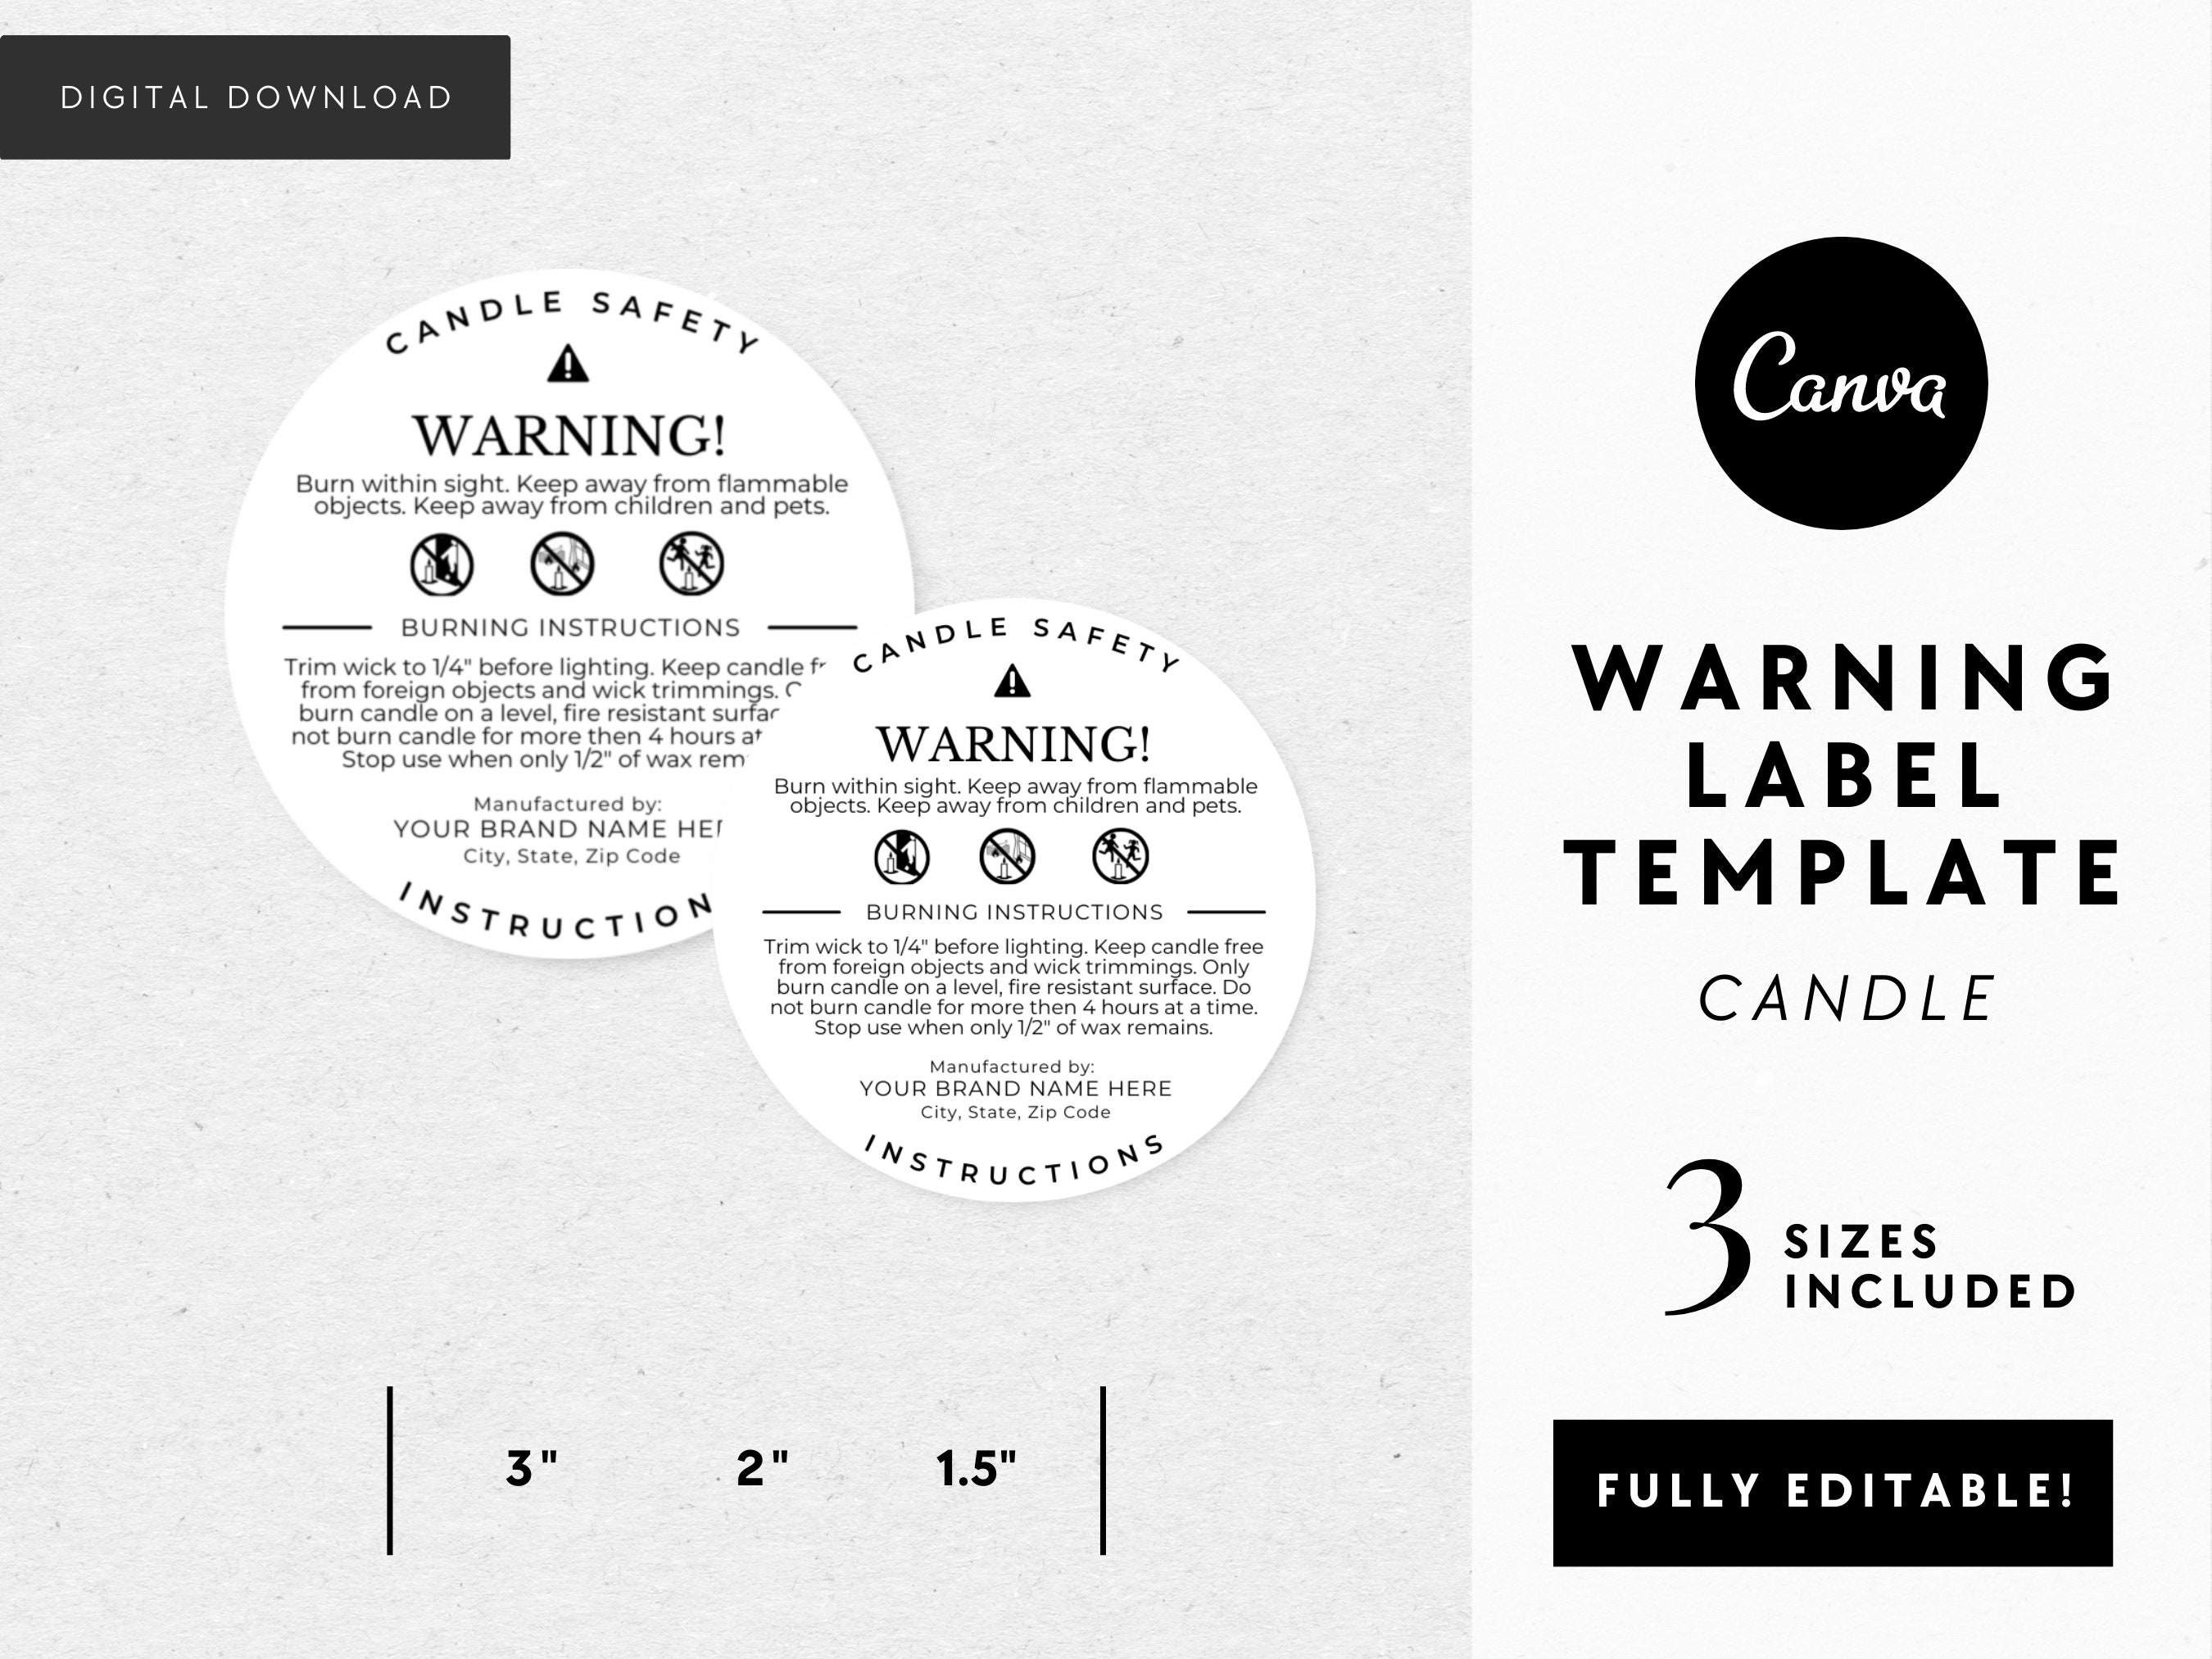 100% Editable Candle Warning Label Template, Printable Candle Safety  Sticker, 1.5 2 3 Round Warning Label, Candle Safety Instructions 